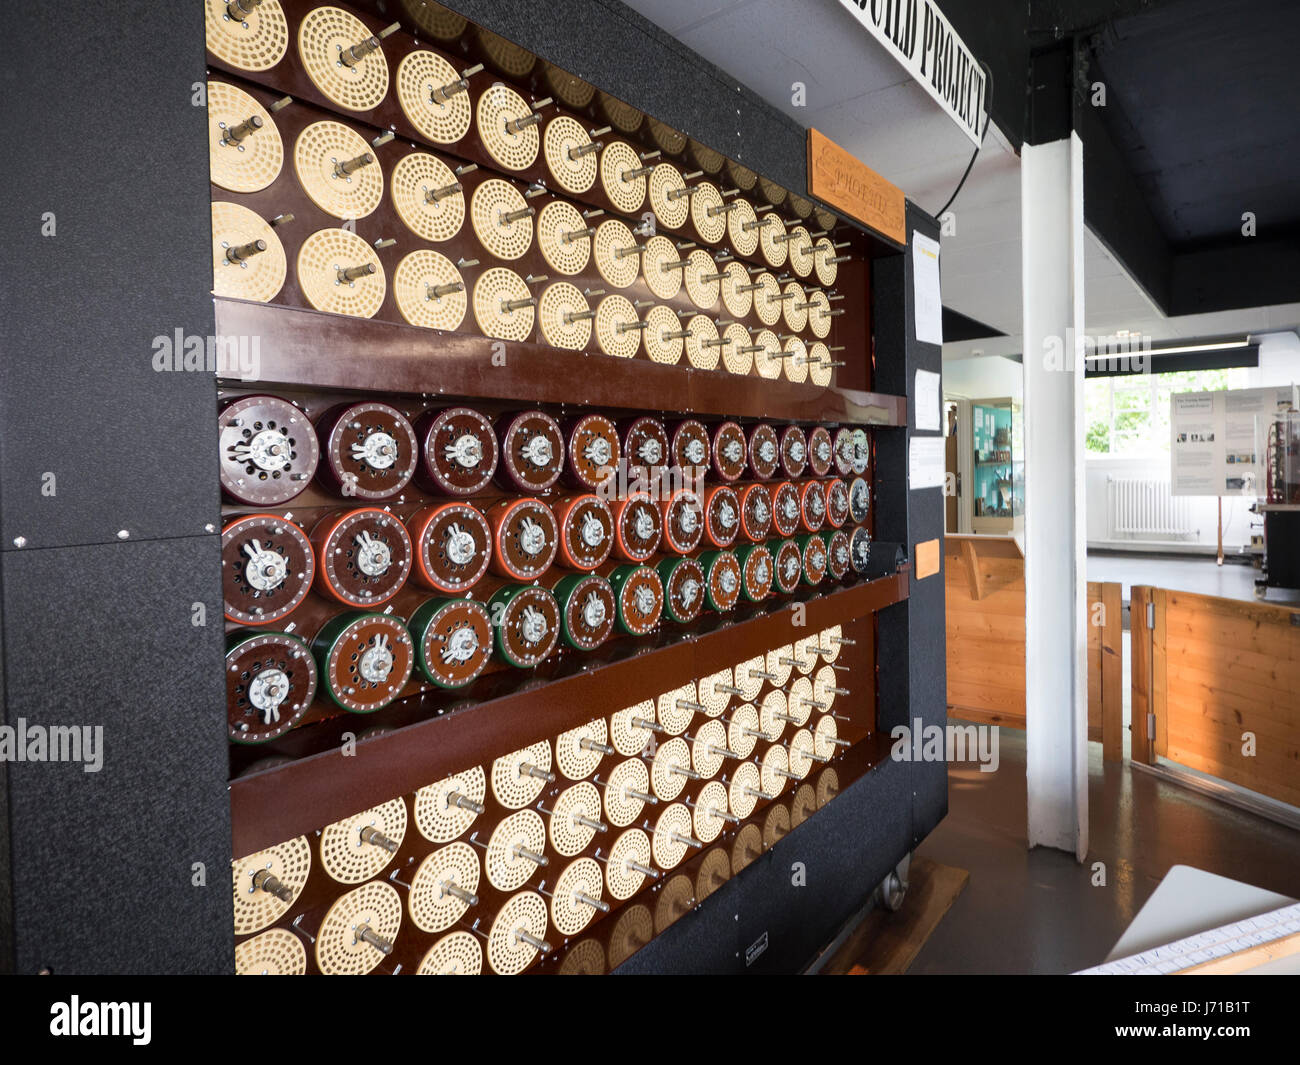 A working recreation of the Turing Machine or Bombe at the home of the WWll codebreakers at Bletchley Park in England. Stock Photo